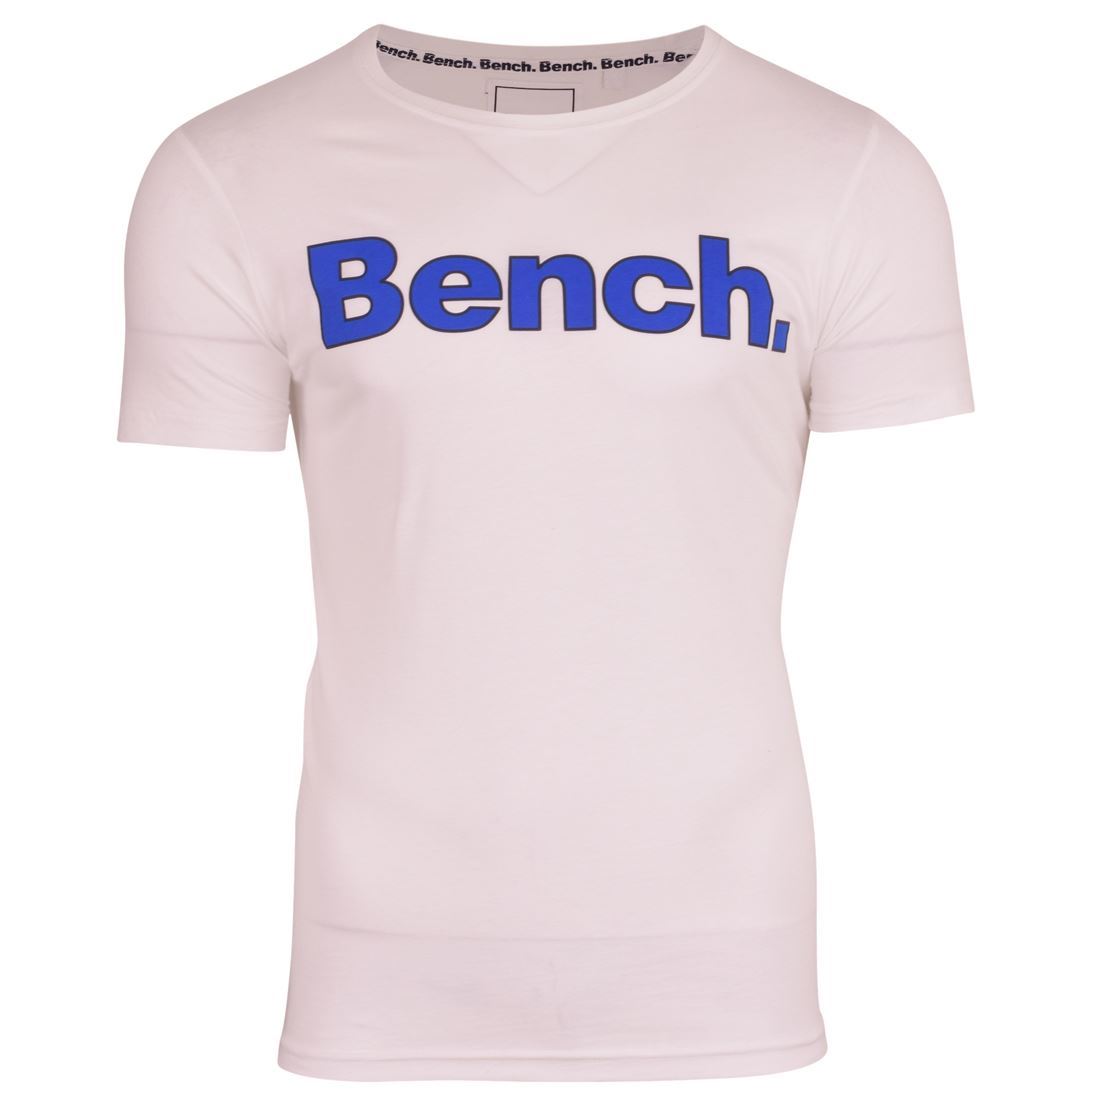 Bench Mens Shorts Sleeved Crew Neck T Shirt Graphic Large Logo Cotton Tee